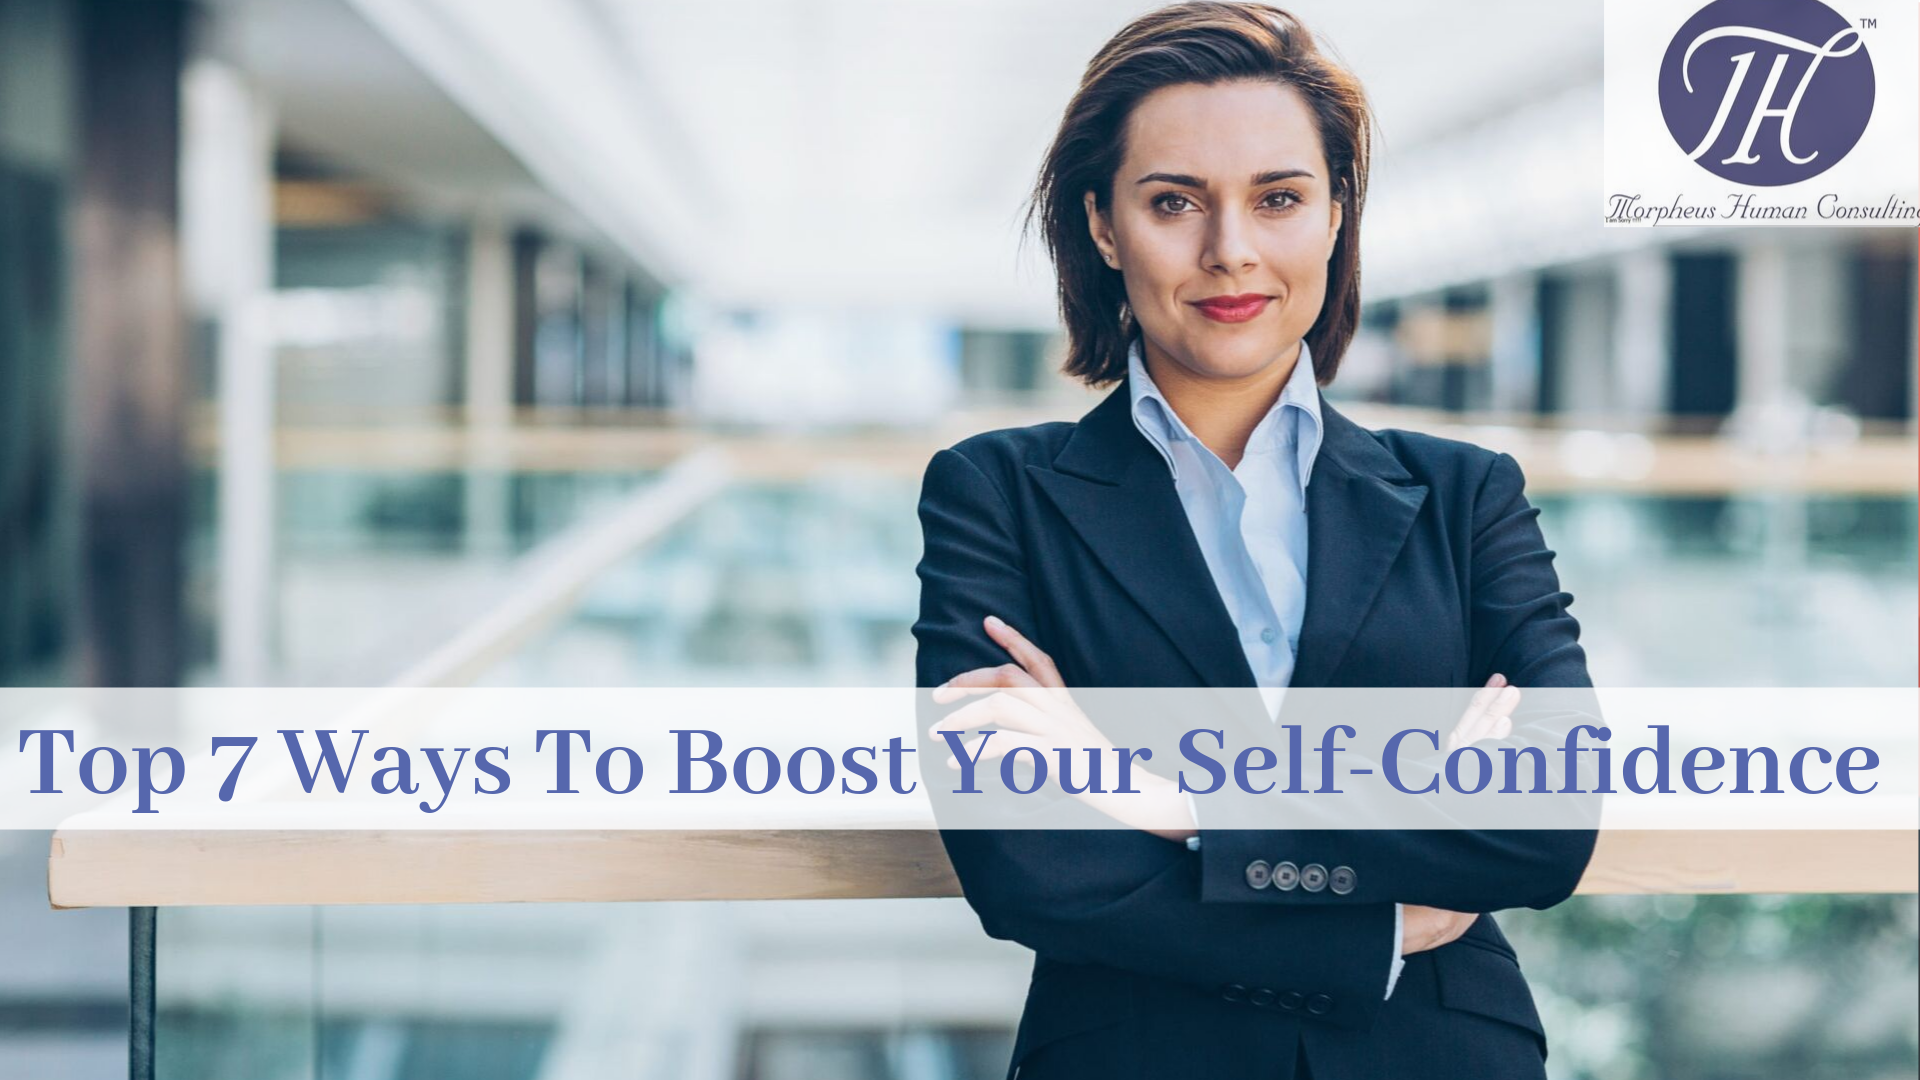 Top 7 Ways To Boost Your Self-Confidence